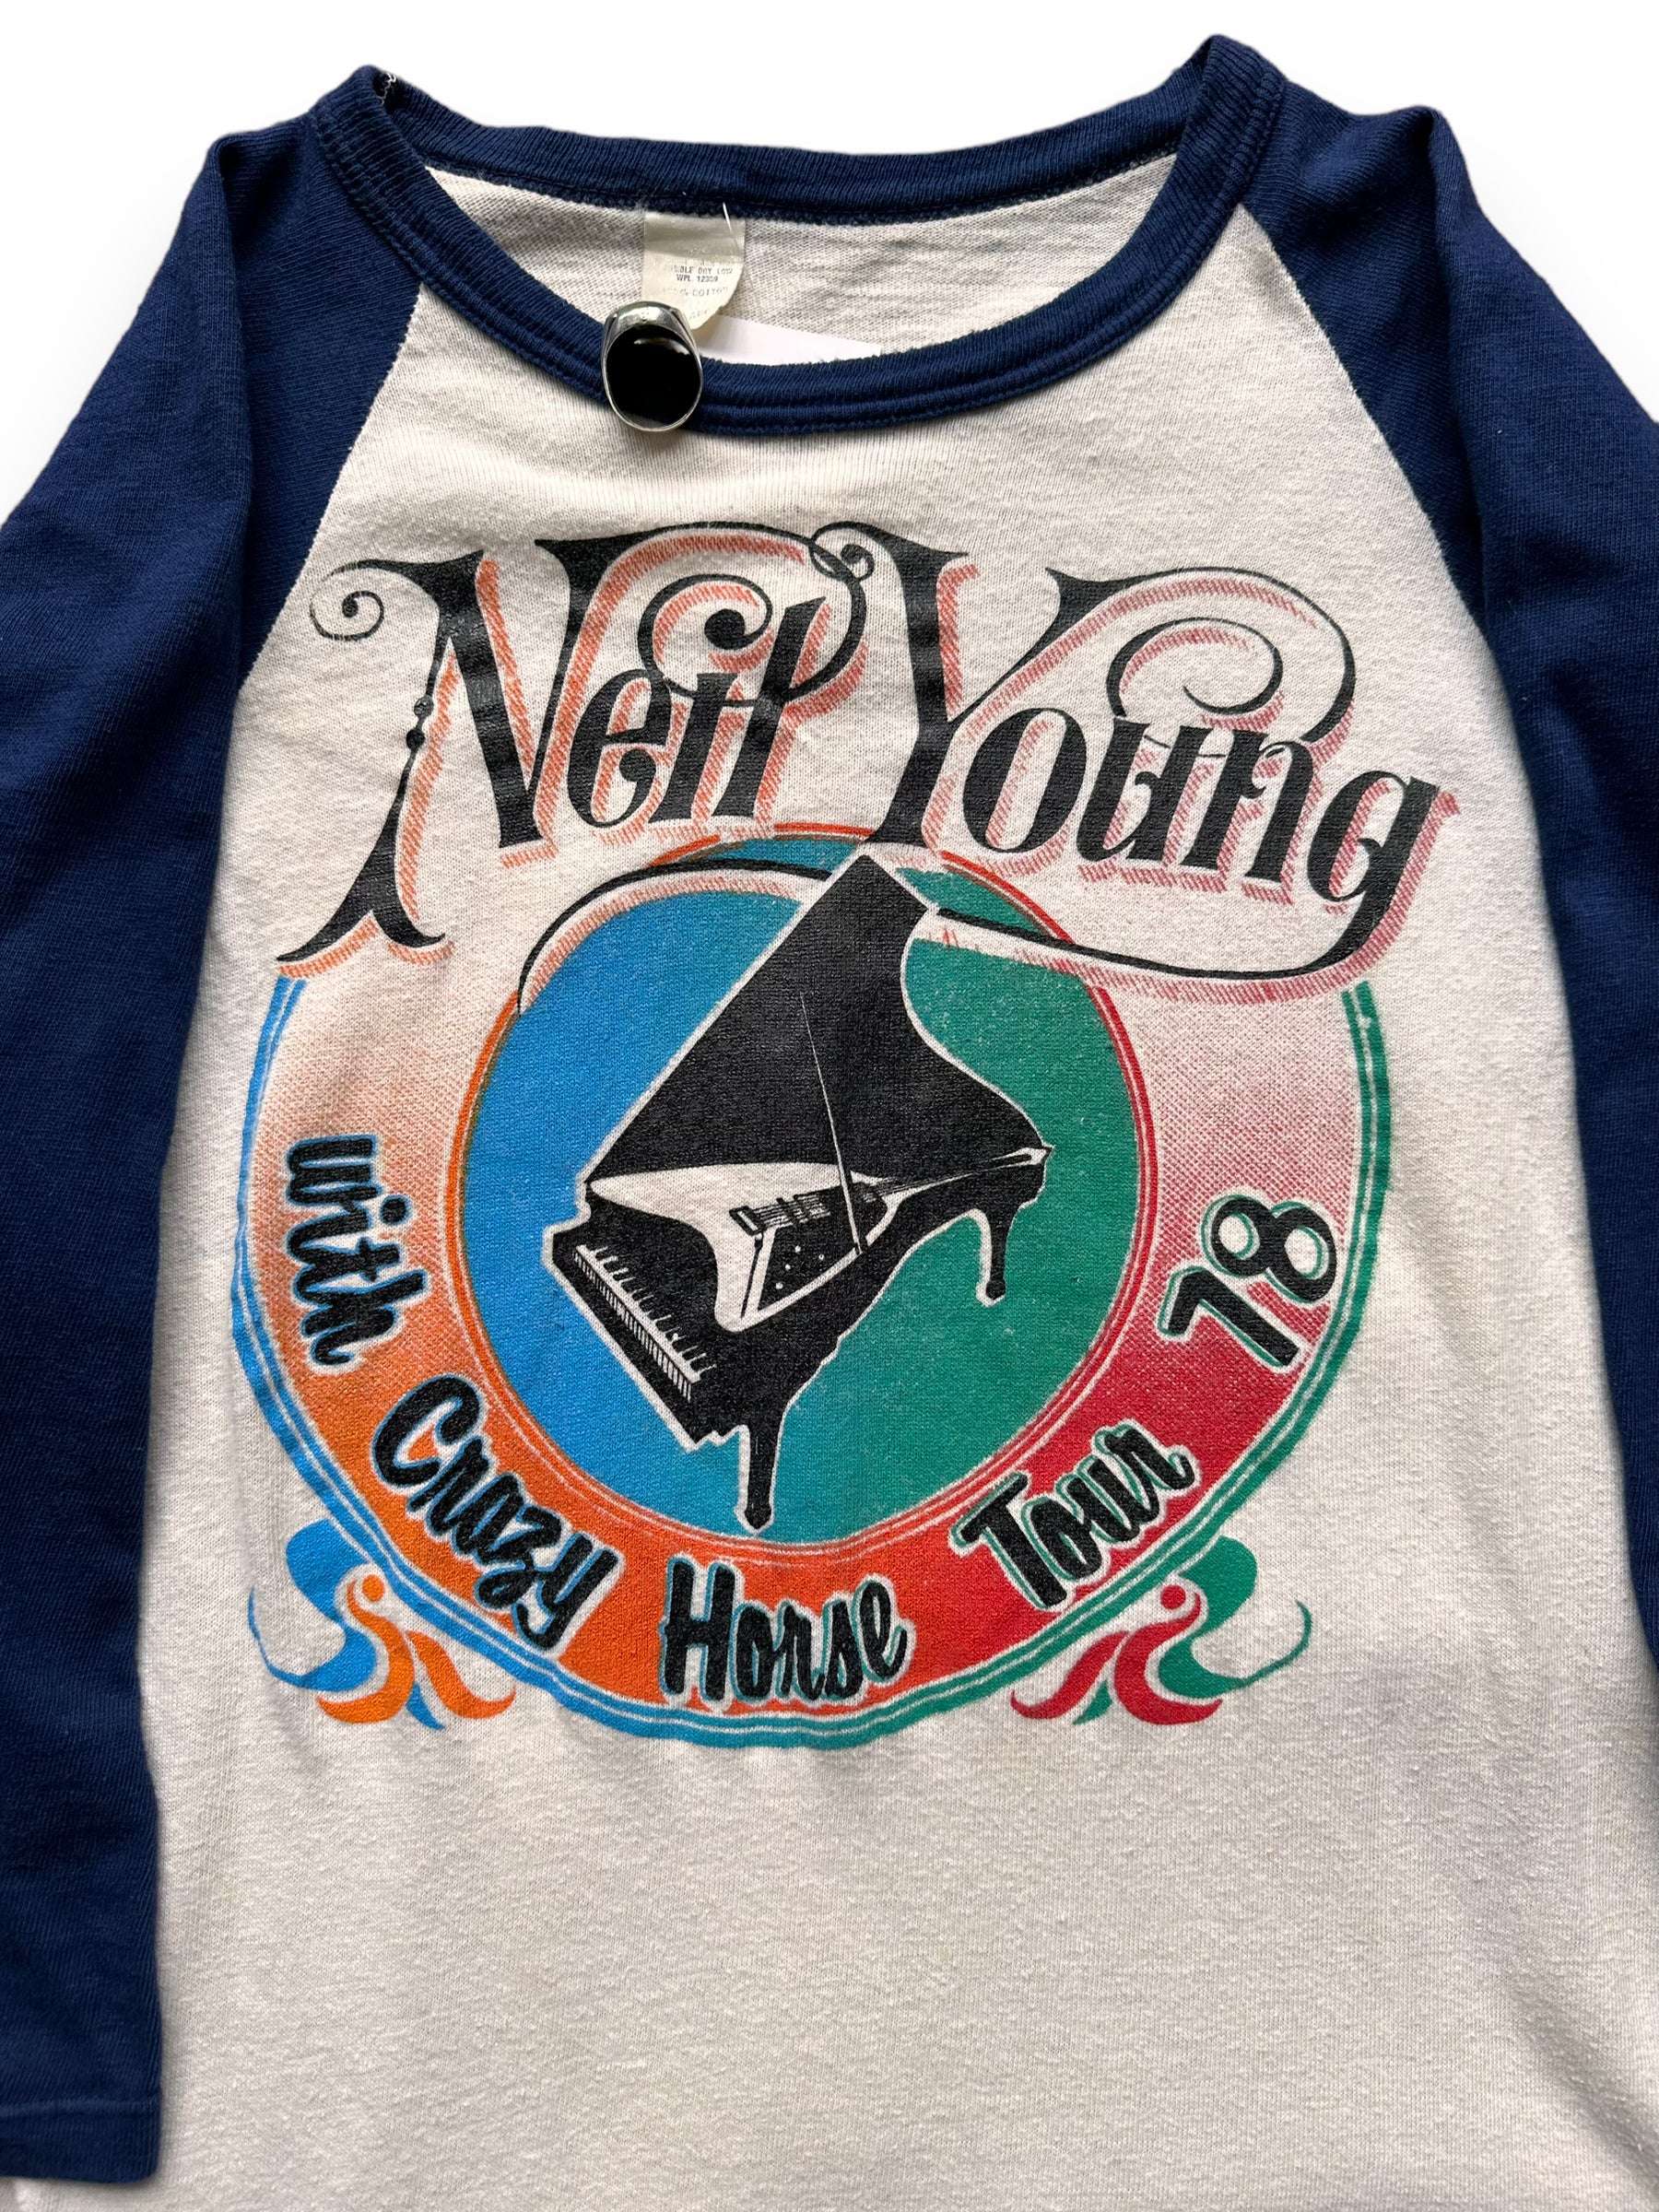 Front Graphic Detail on Vintage Neil Young & Crazy Horse 1978 Tour Tee SZ XL |  Barn Owl Vintage Clothing | Vintage Neil Young Tees Seattle